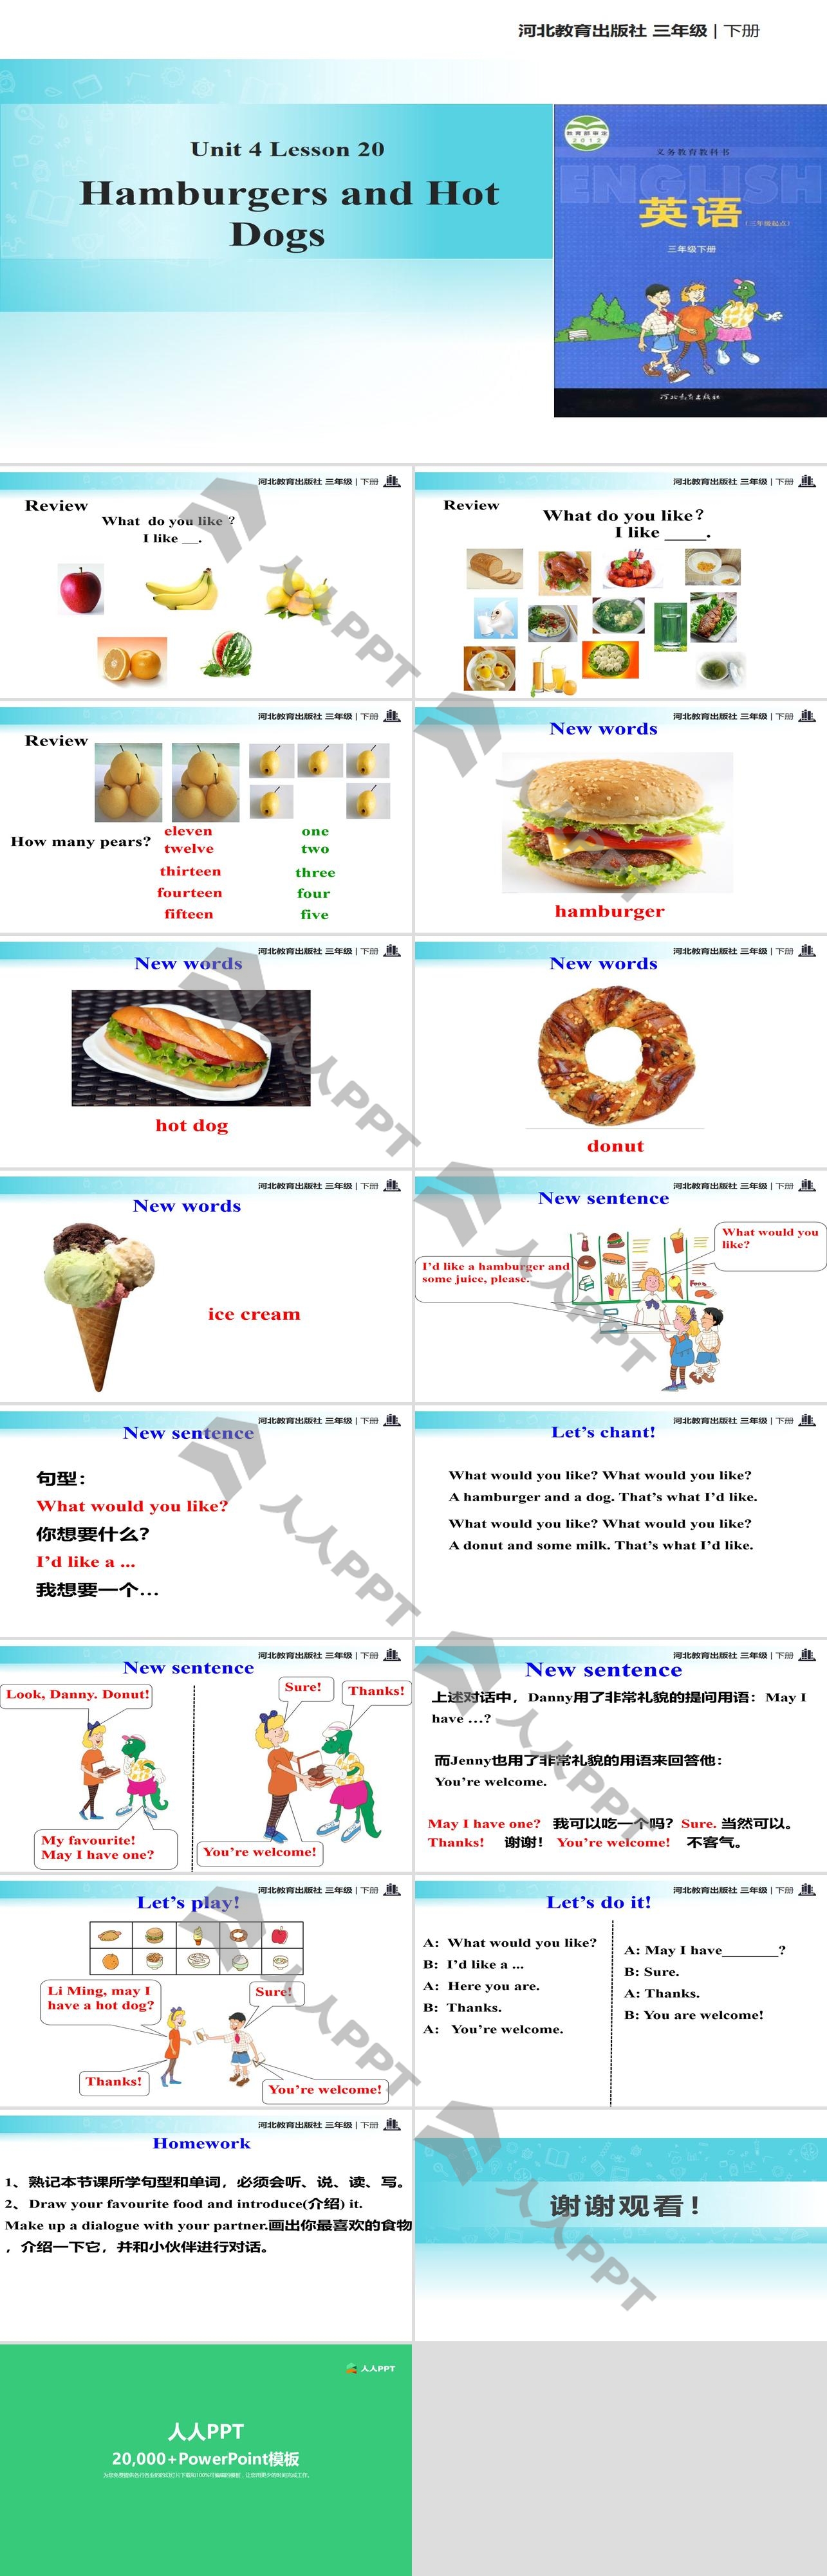 《Hamburgers and Hot Dogs》Food and Restaurants PPT课件长图